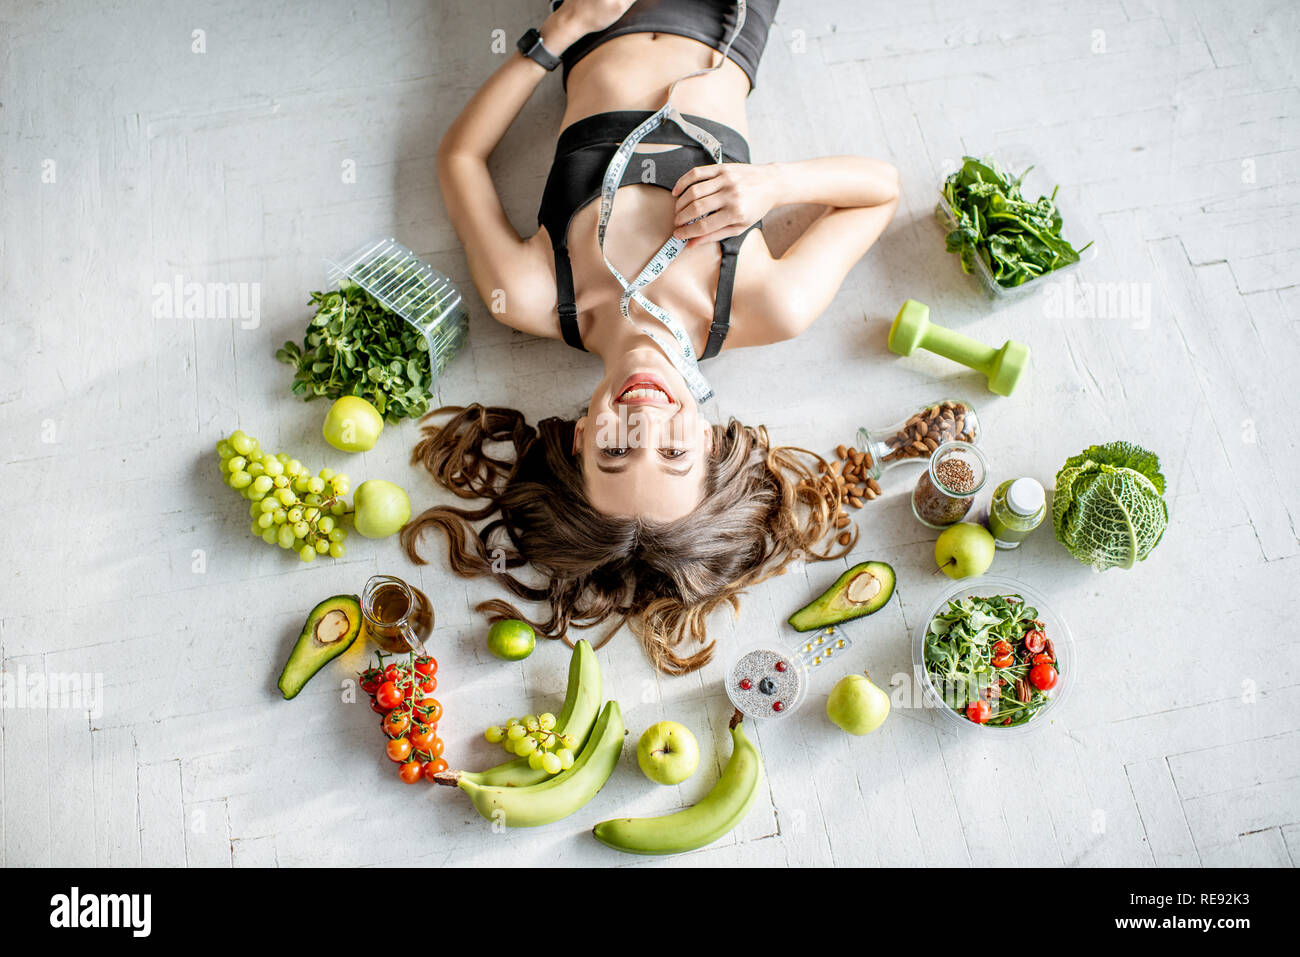 Beauty portrait of a sports woman surrounded by various healthy food lying on the floor. Healthy eating and sports lifestyle concept Stock Photo